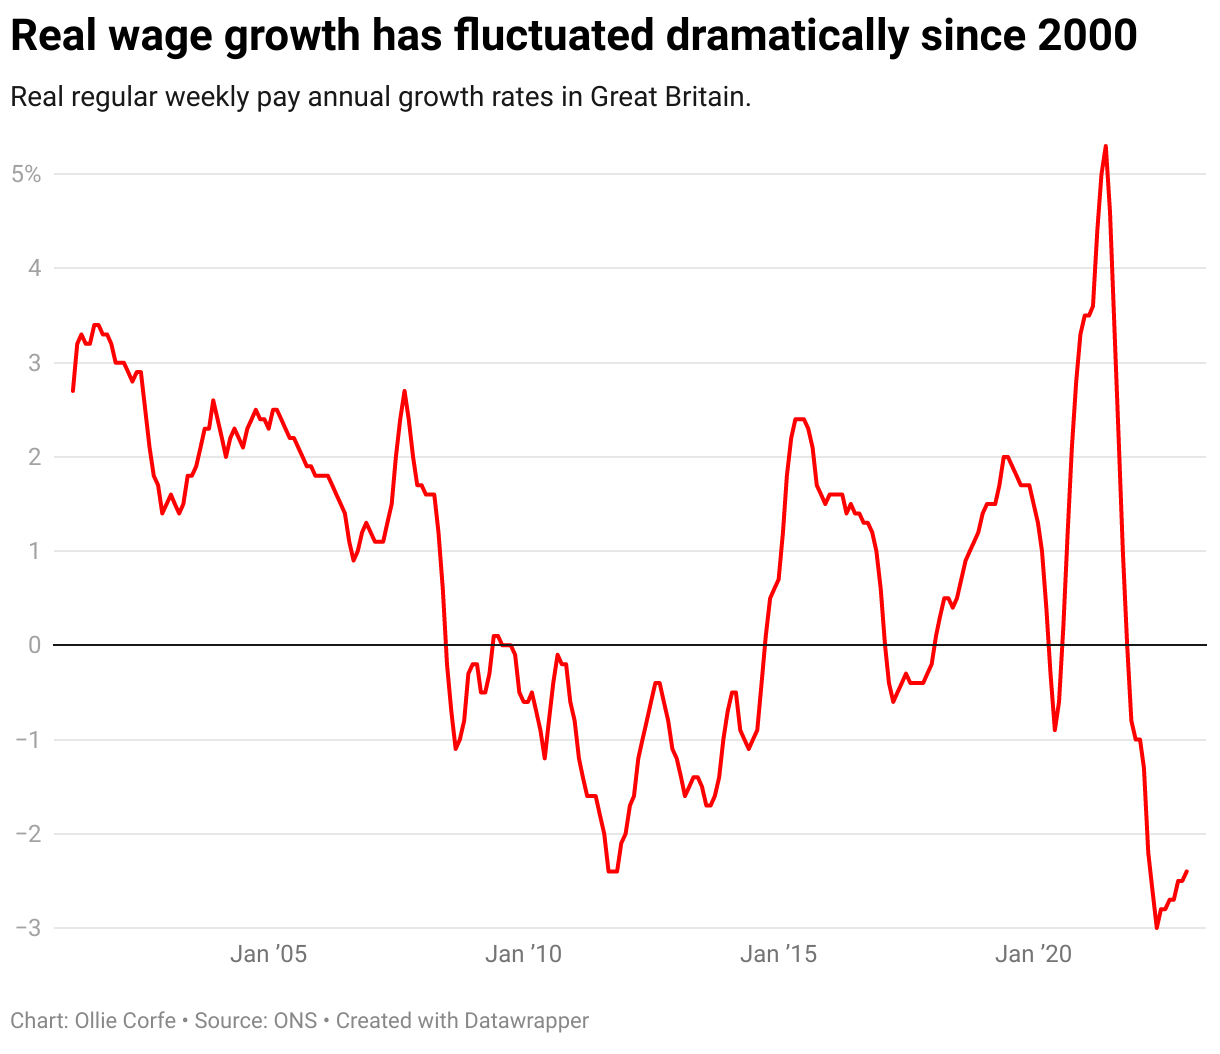 Real pay growth in Great Britain since 2000.